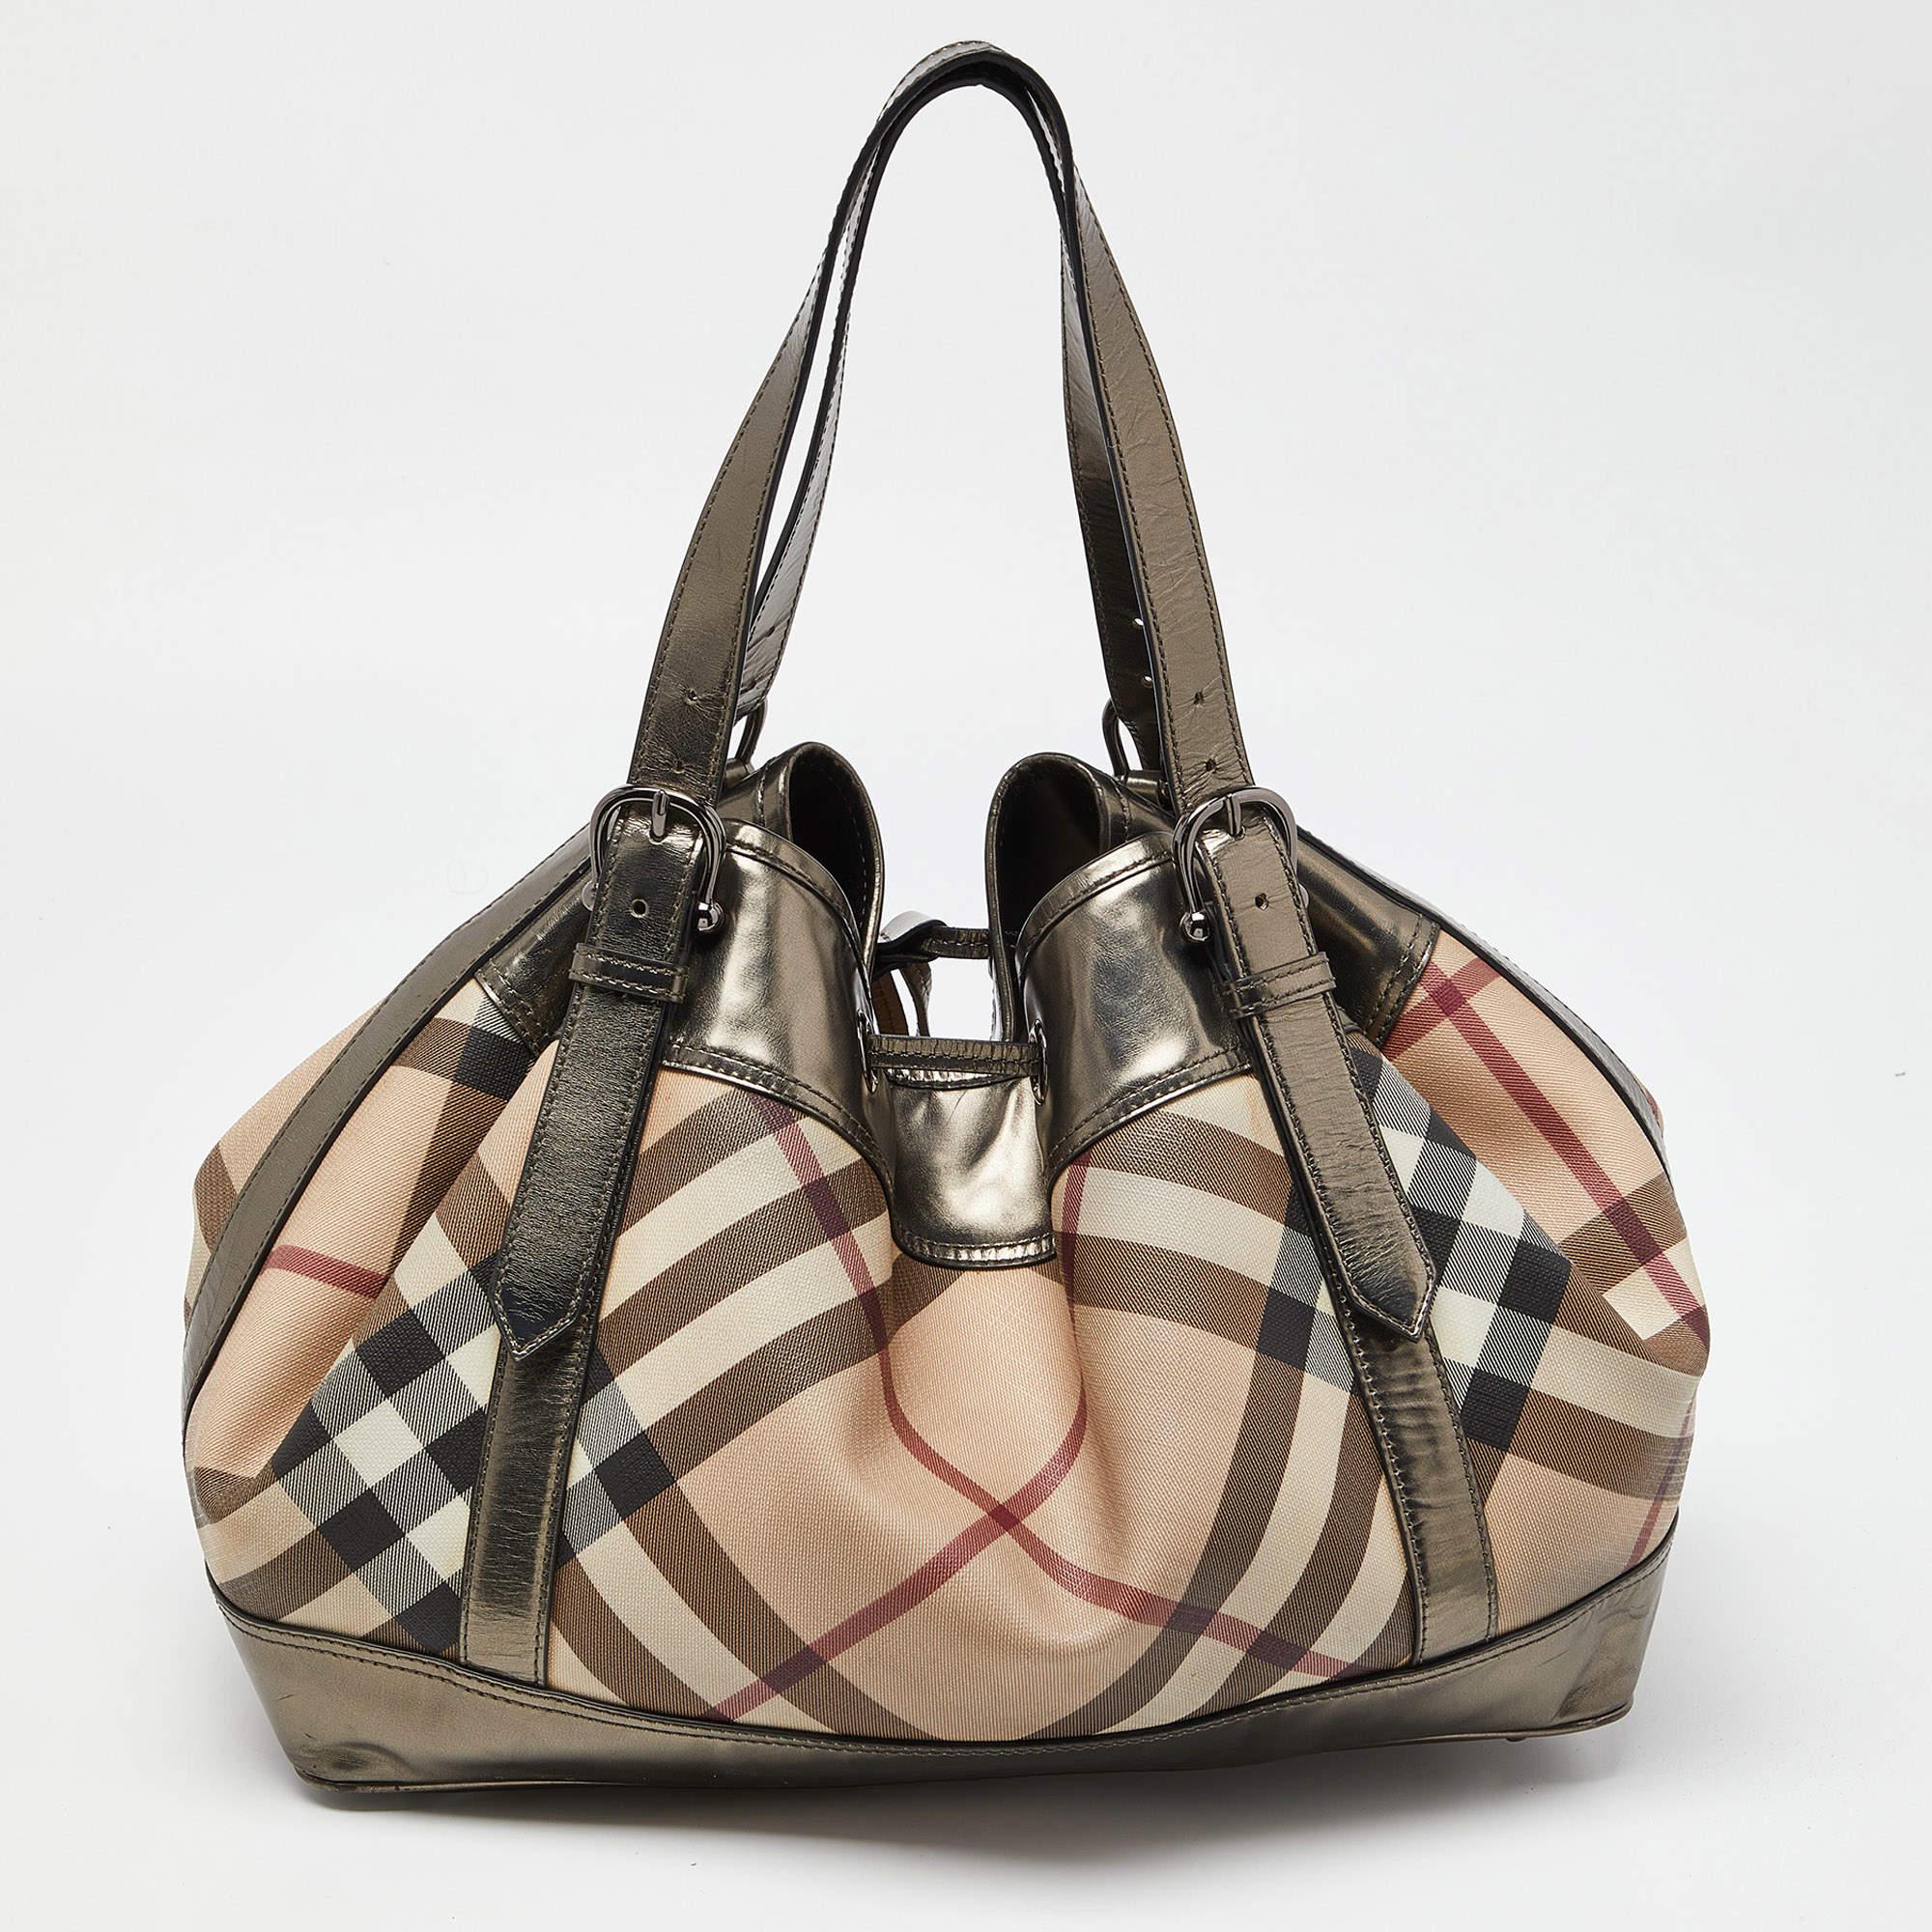 Know to create stylish, sophisticated, and timeless designs, Burberry is a brand worth investing in. The bags that come from this brand's atelier are exquisite. This creation bag is no different. Crafted from Nova Check canvas and leather it comes